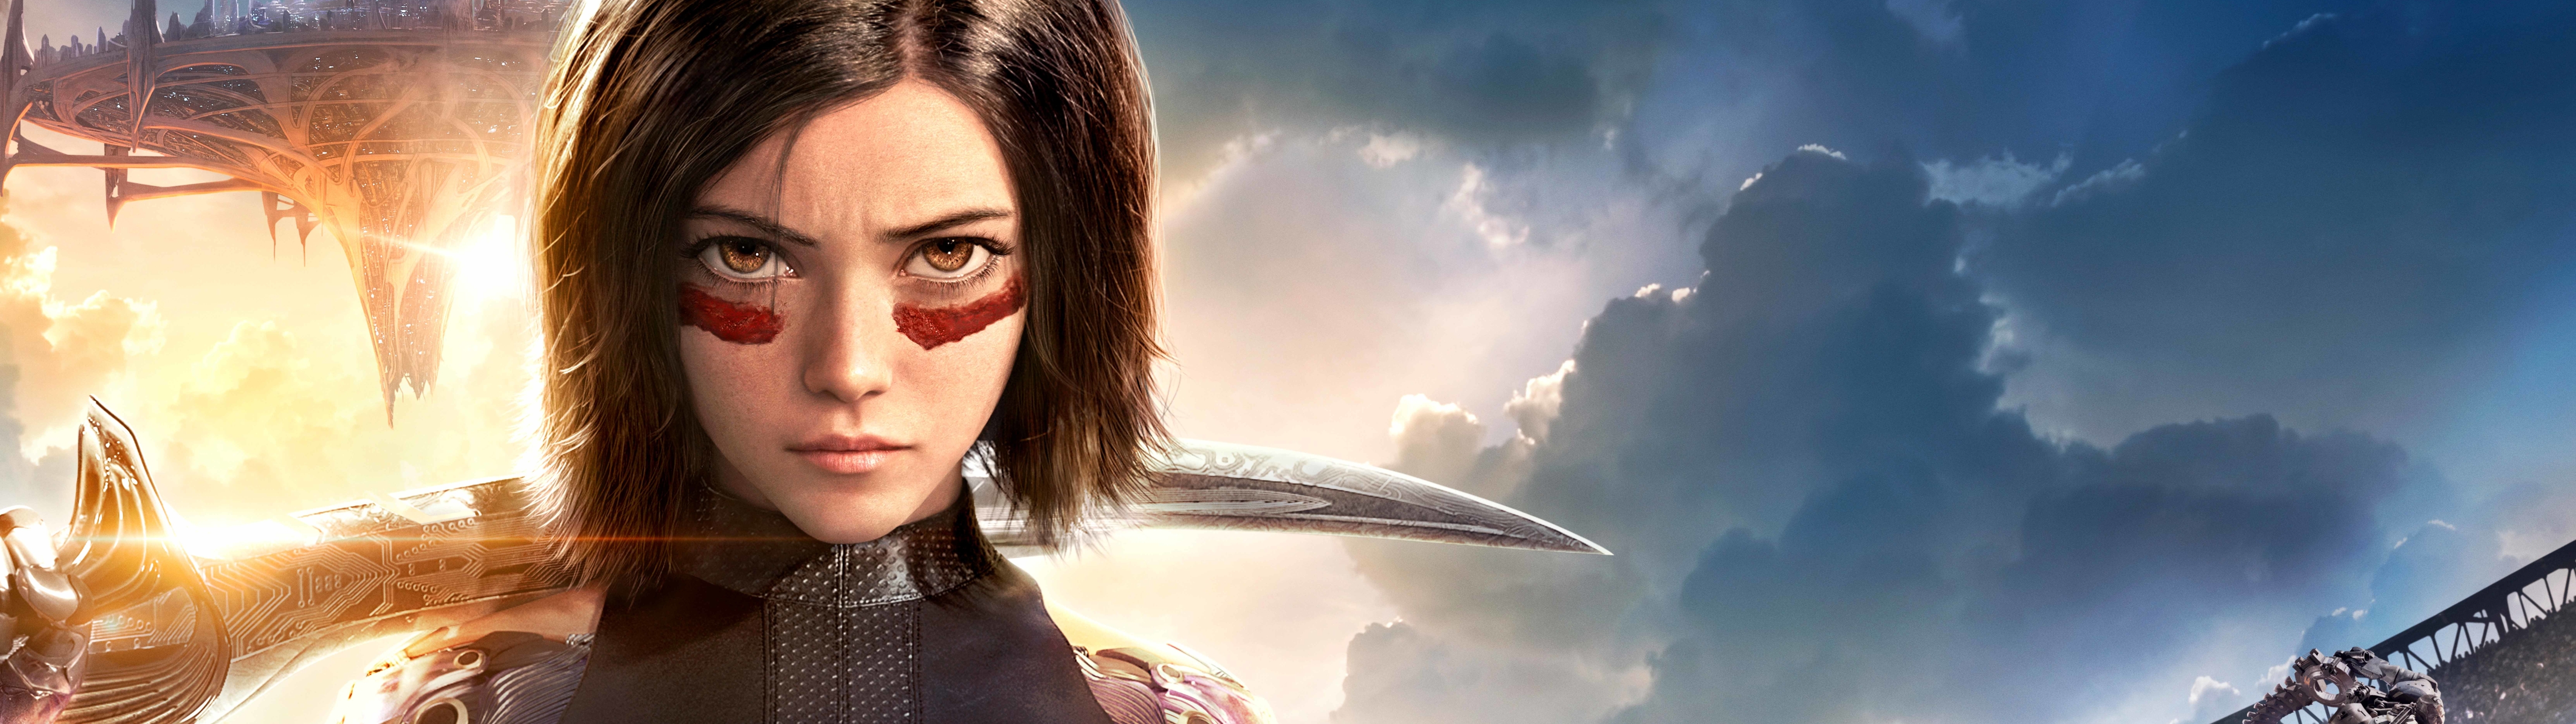 5120x1440 Alita Battle Angel 5120x1440 Resolution Wallpaper, HD Movies 4K  Wallpapers, Images, Photos and Background - Wallpapers Den